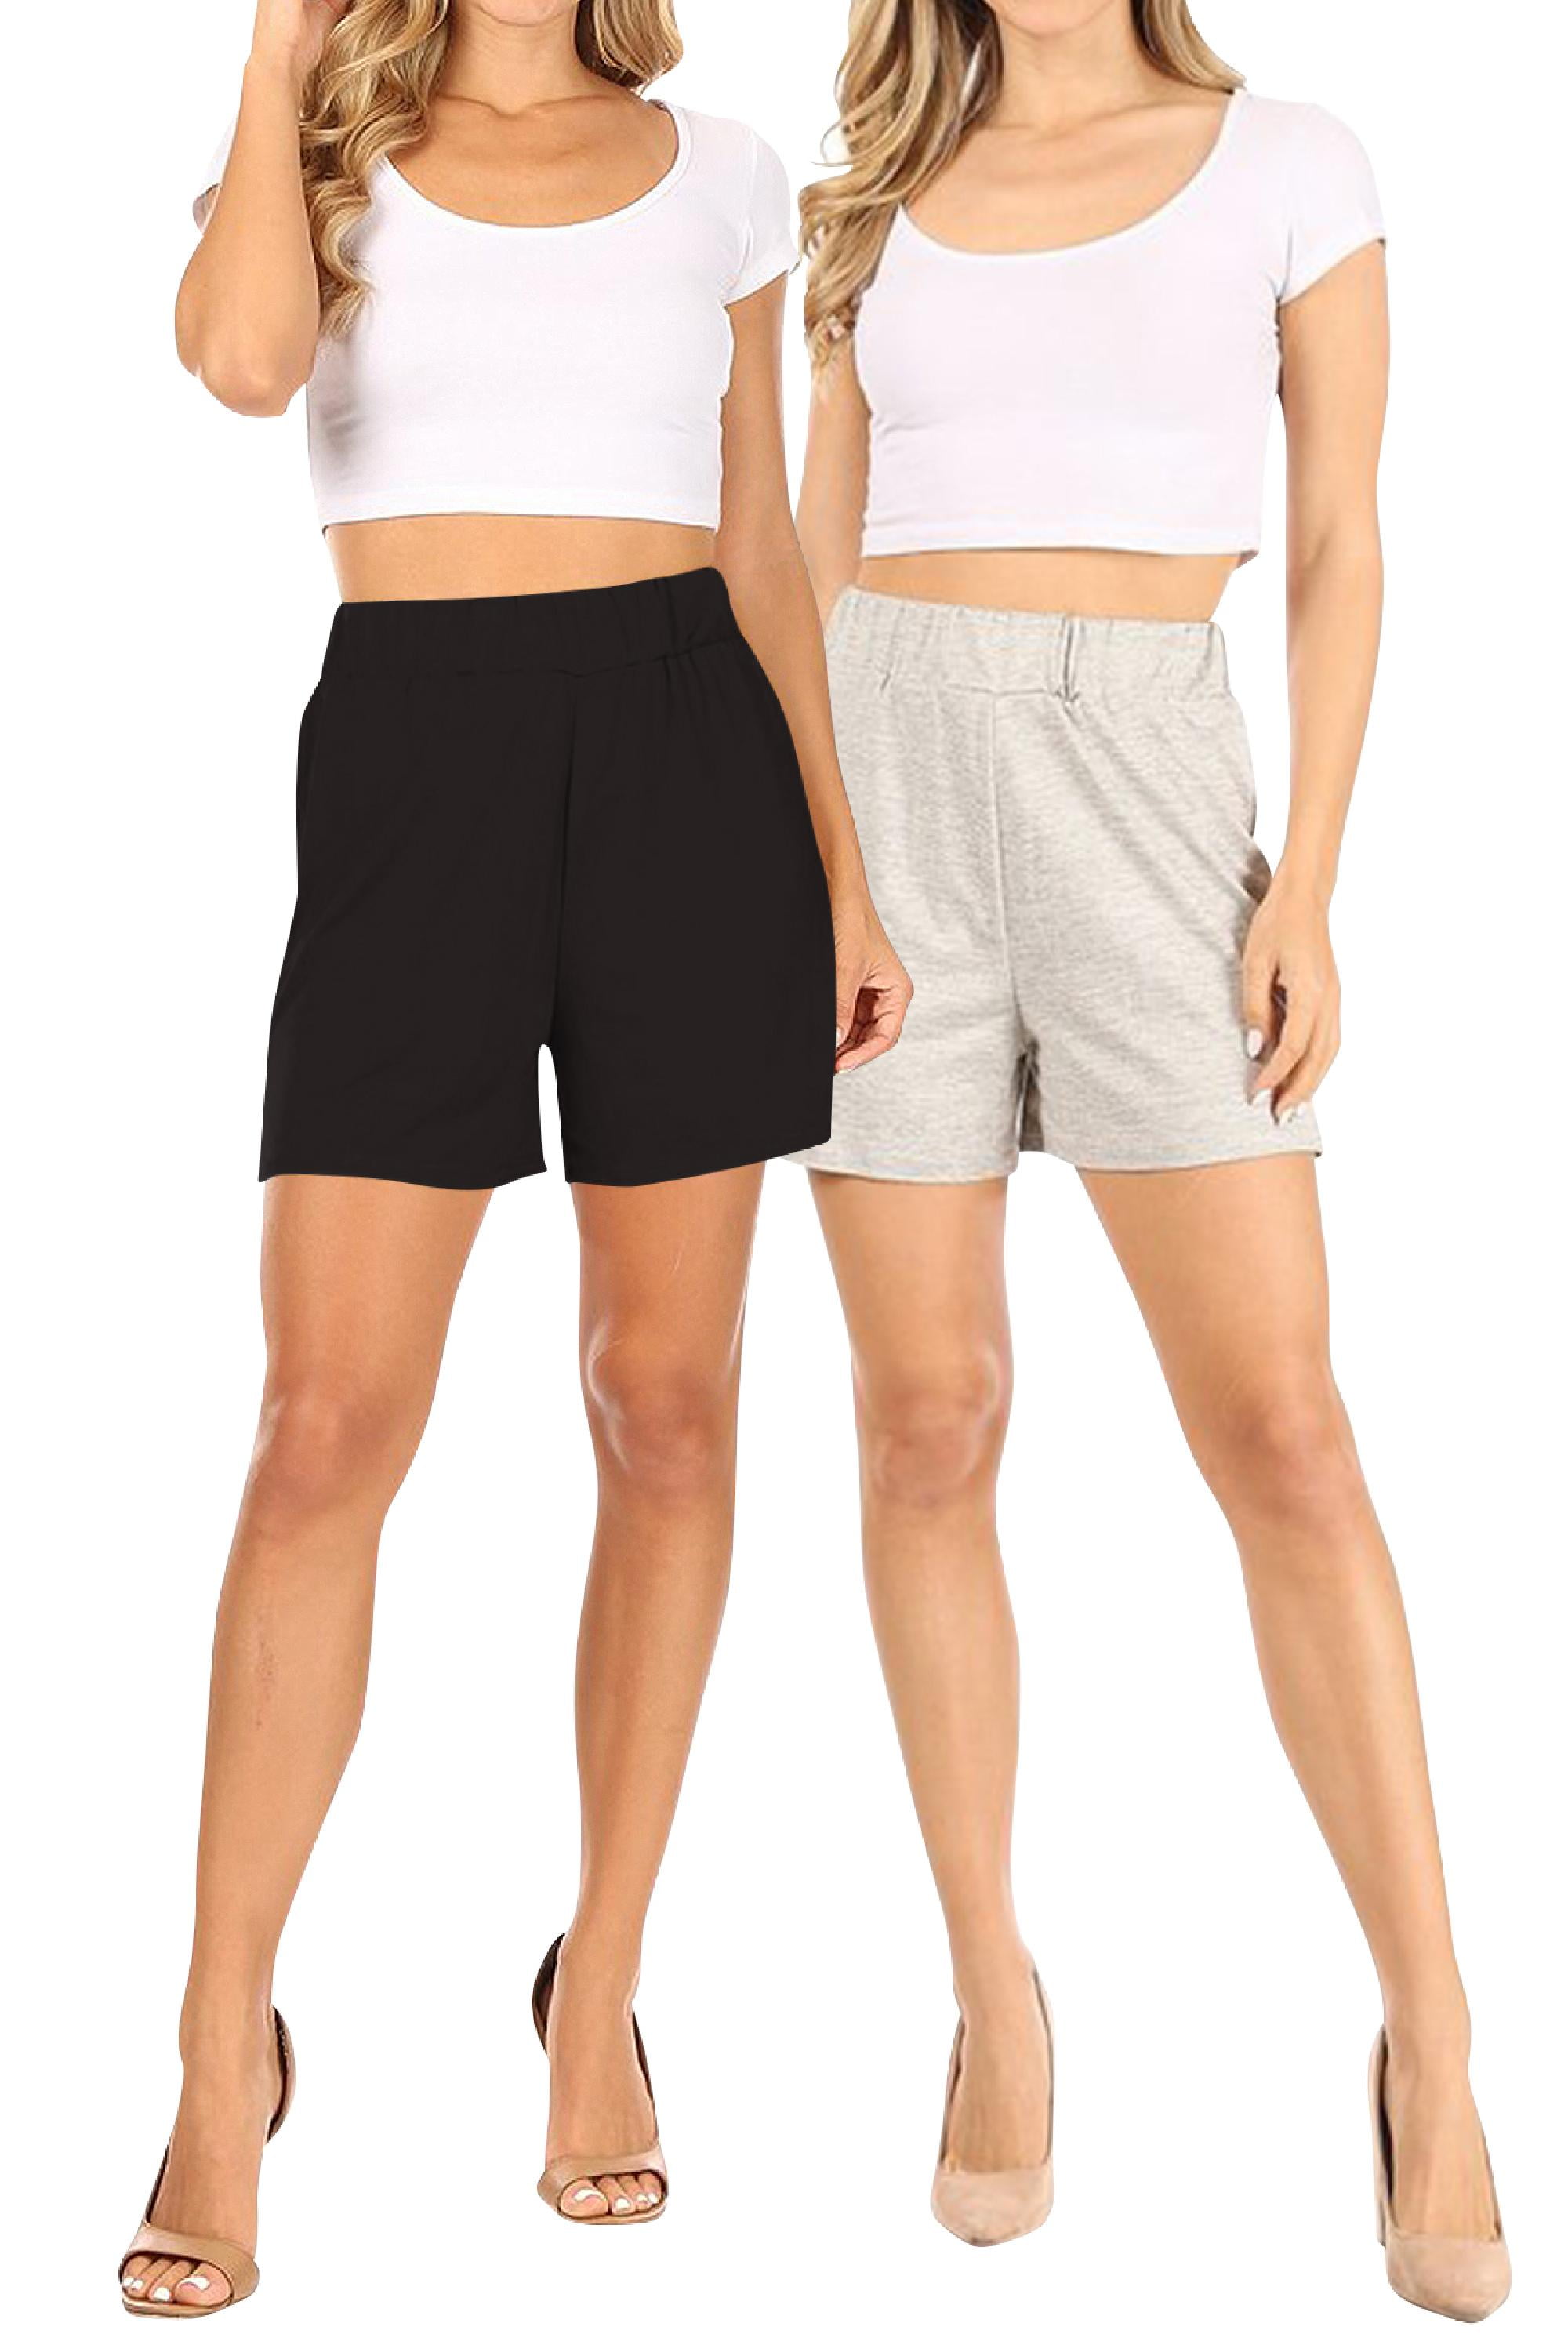 Women's Casual Stretch High Rise Solid Basic Shorts Pants (Pack of 